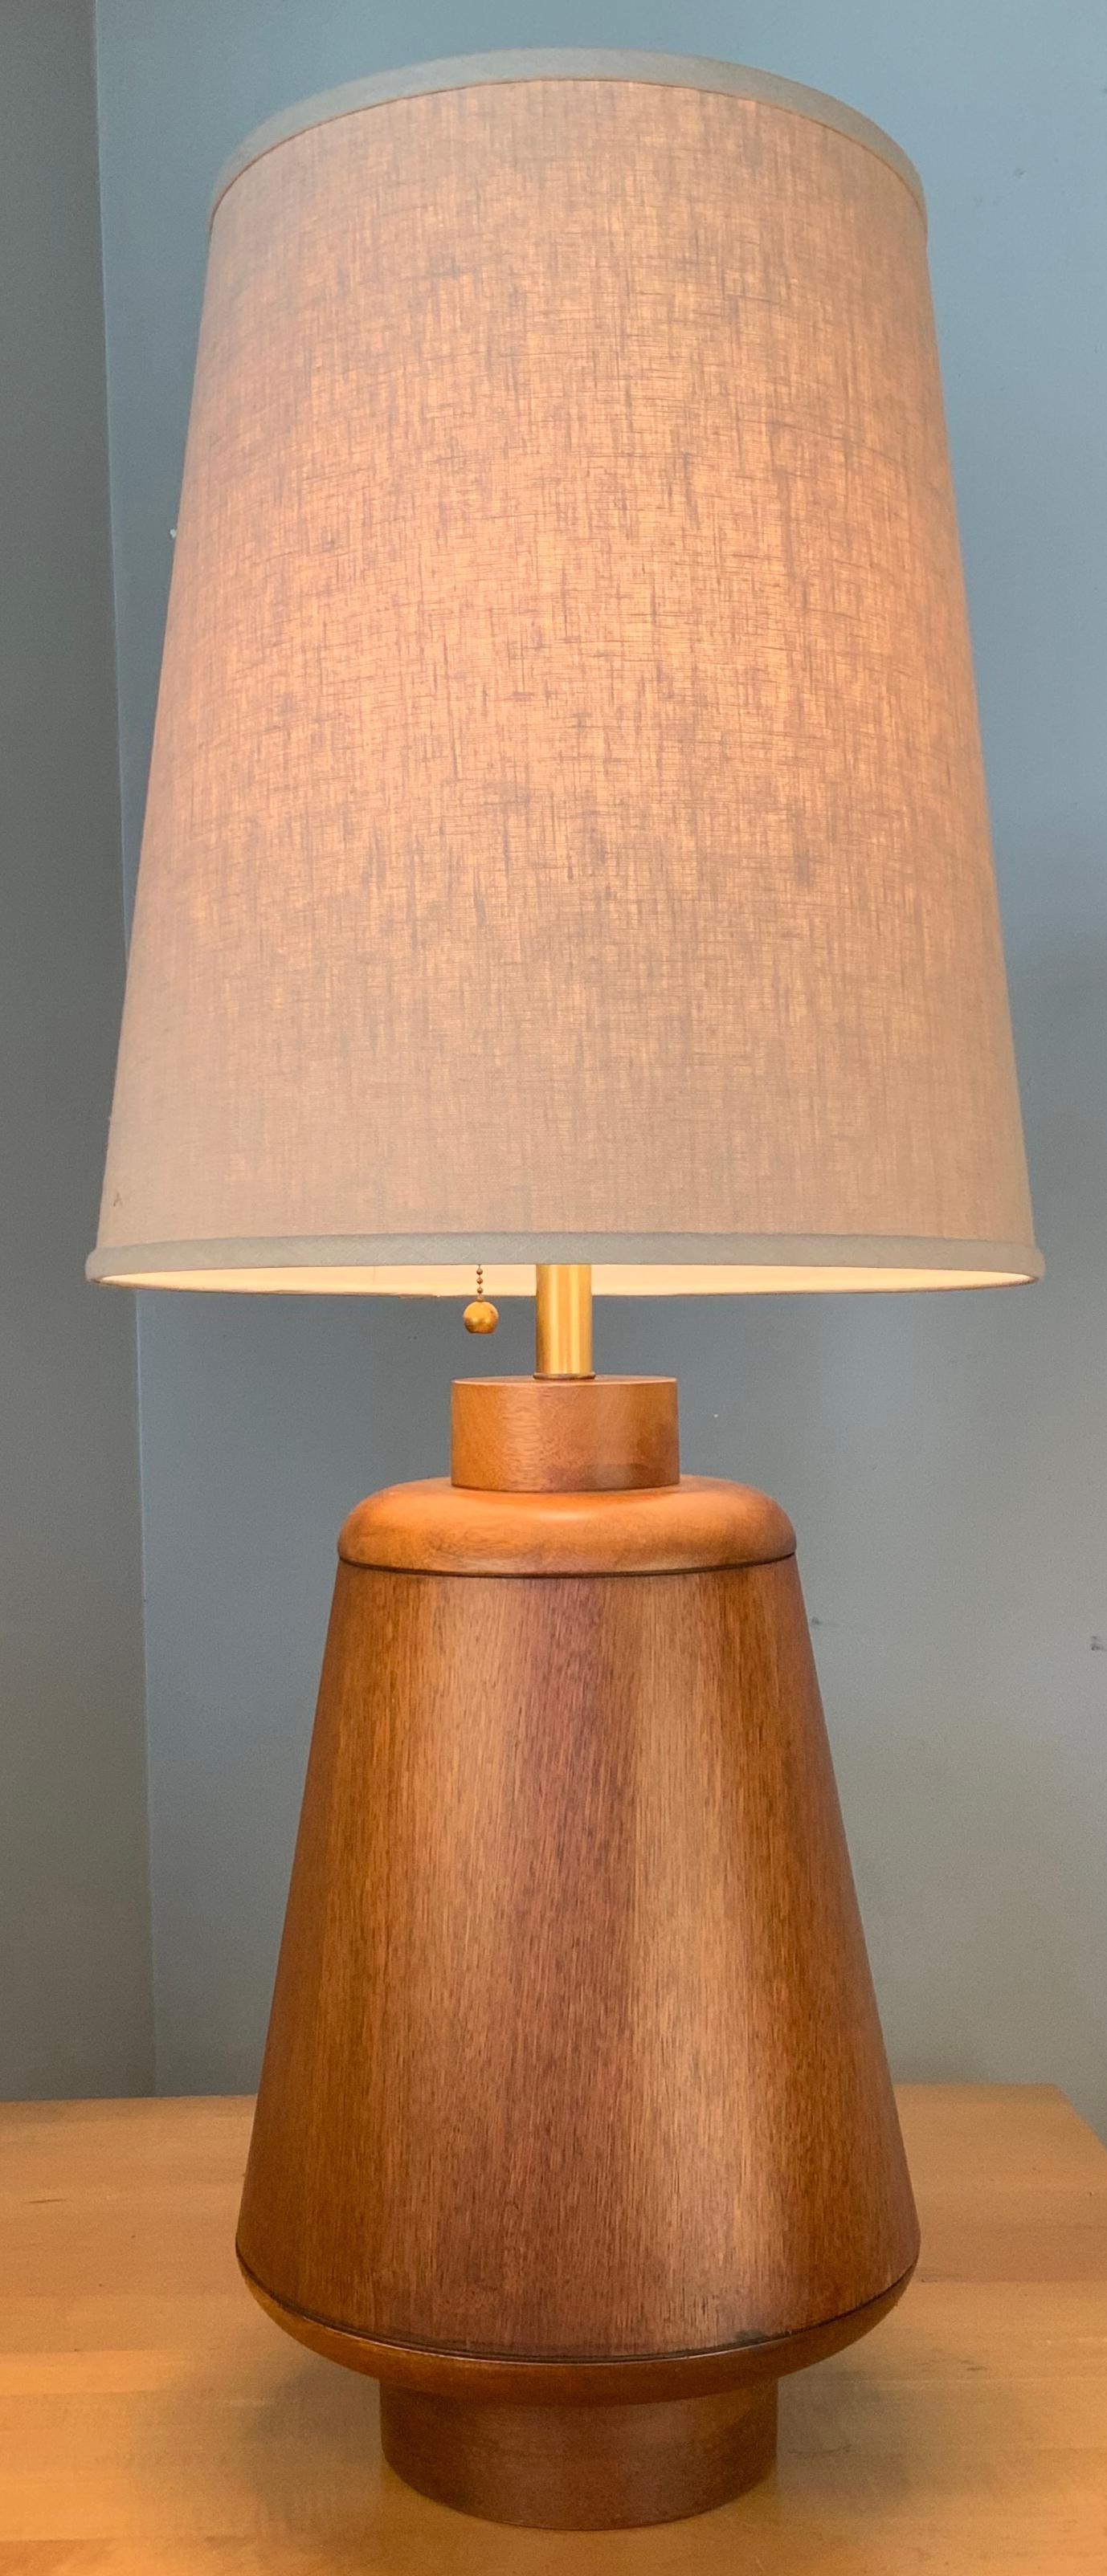 a wonderful large scale 1950s walnut table lamp, with a large round tapered base. beautiful scale and proportions, along with a tapered linen lampshade.